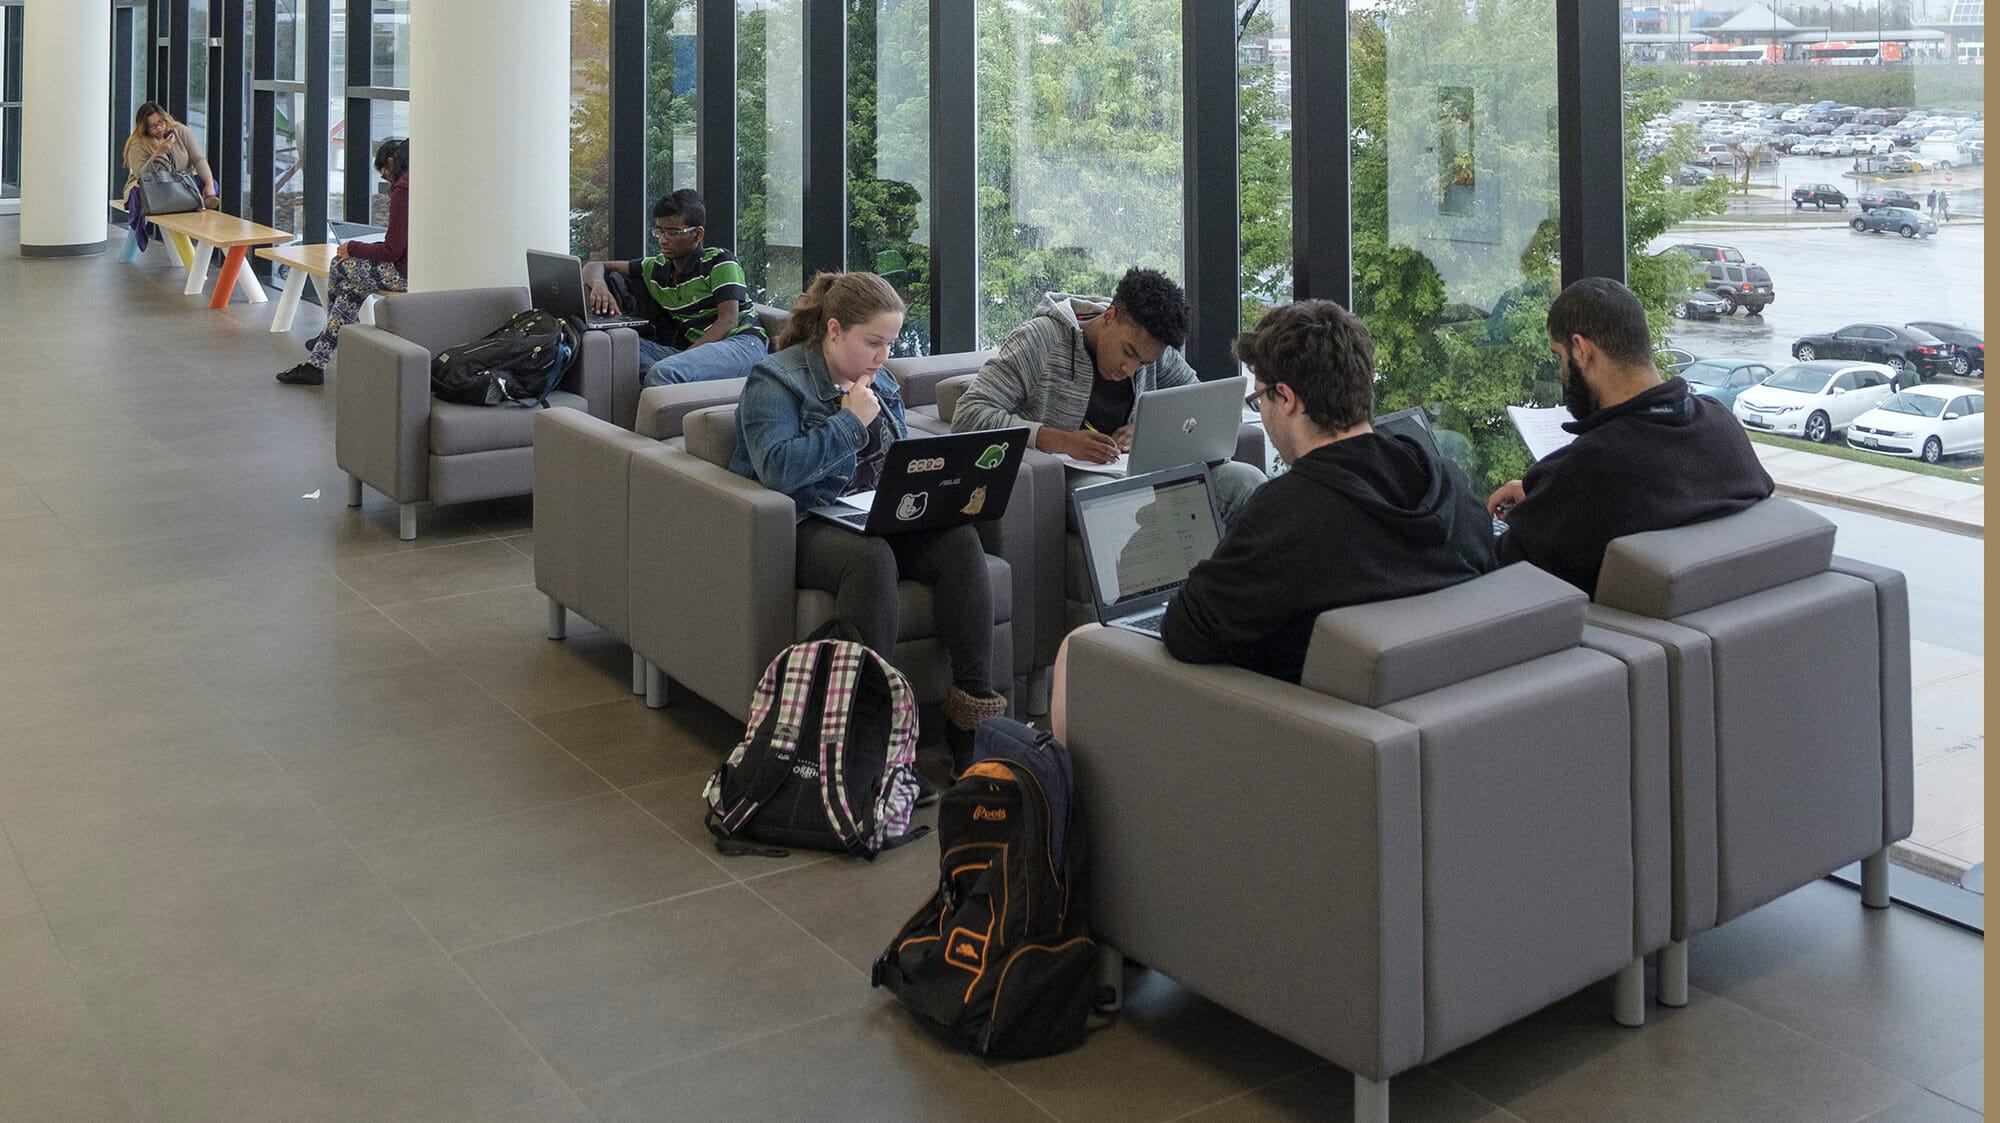 Students with latops sitting in comfortable chairs in a hallway with tall bright windows